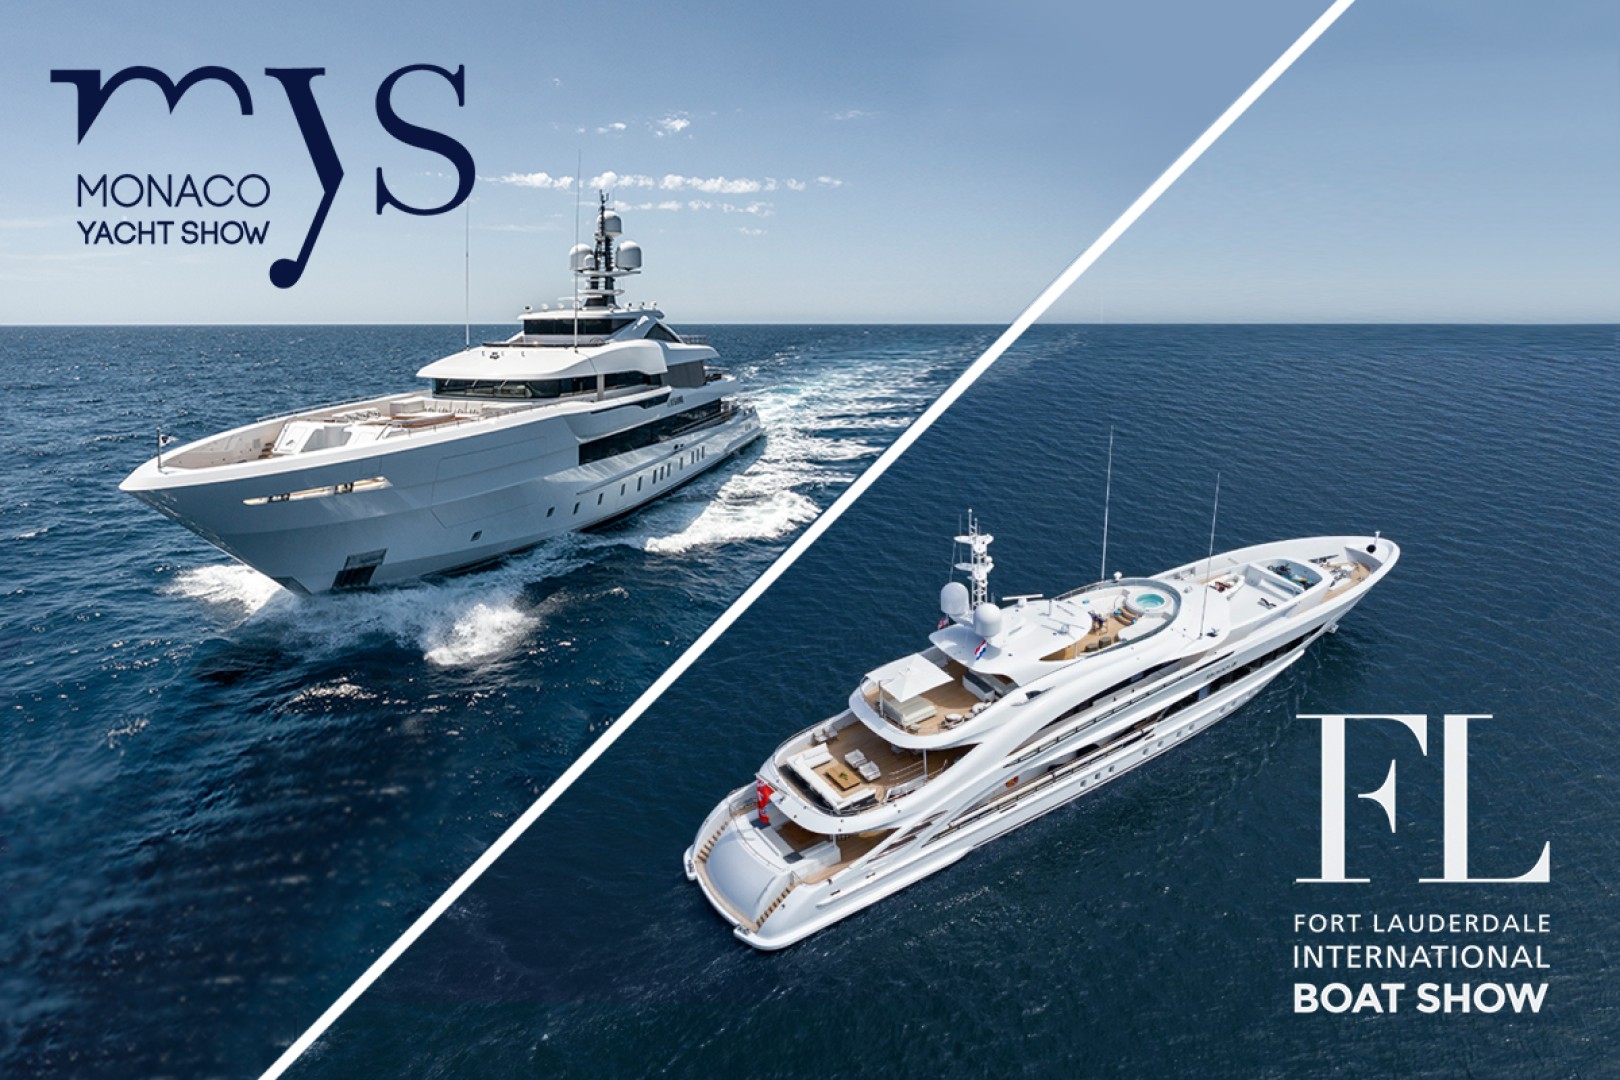 A busy boat show season for Heesen Yachts